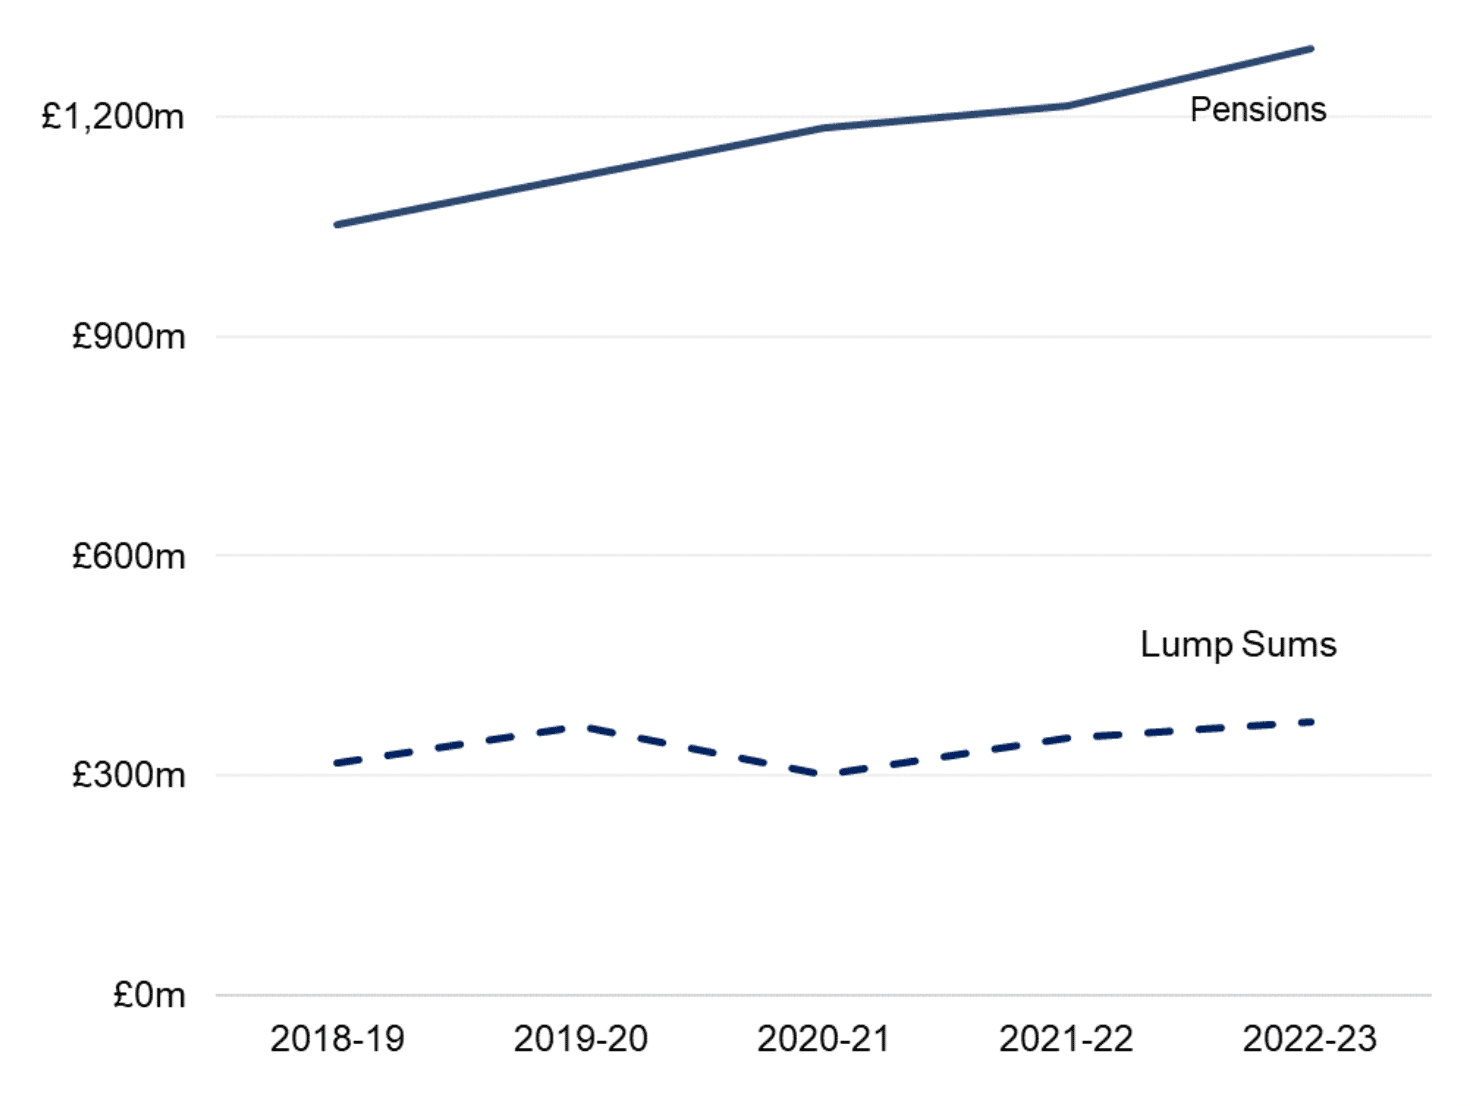 Line chart shows the pensions and lump sum payments made to members over the last five years. Total pensions paid out in 2022-23 was £1,293 million. This has increased year on year since 2018-19. Total lump sums paid out in 2022-23 was £373 million; the highest value since 2018-19.